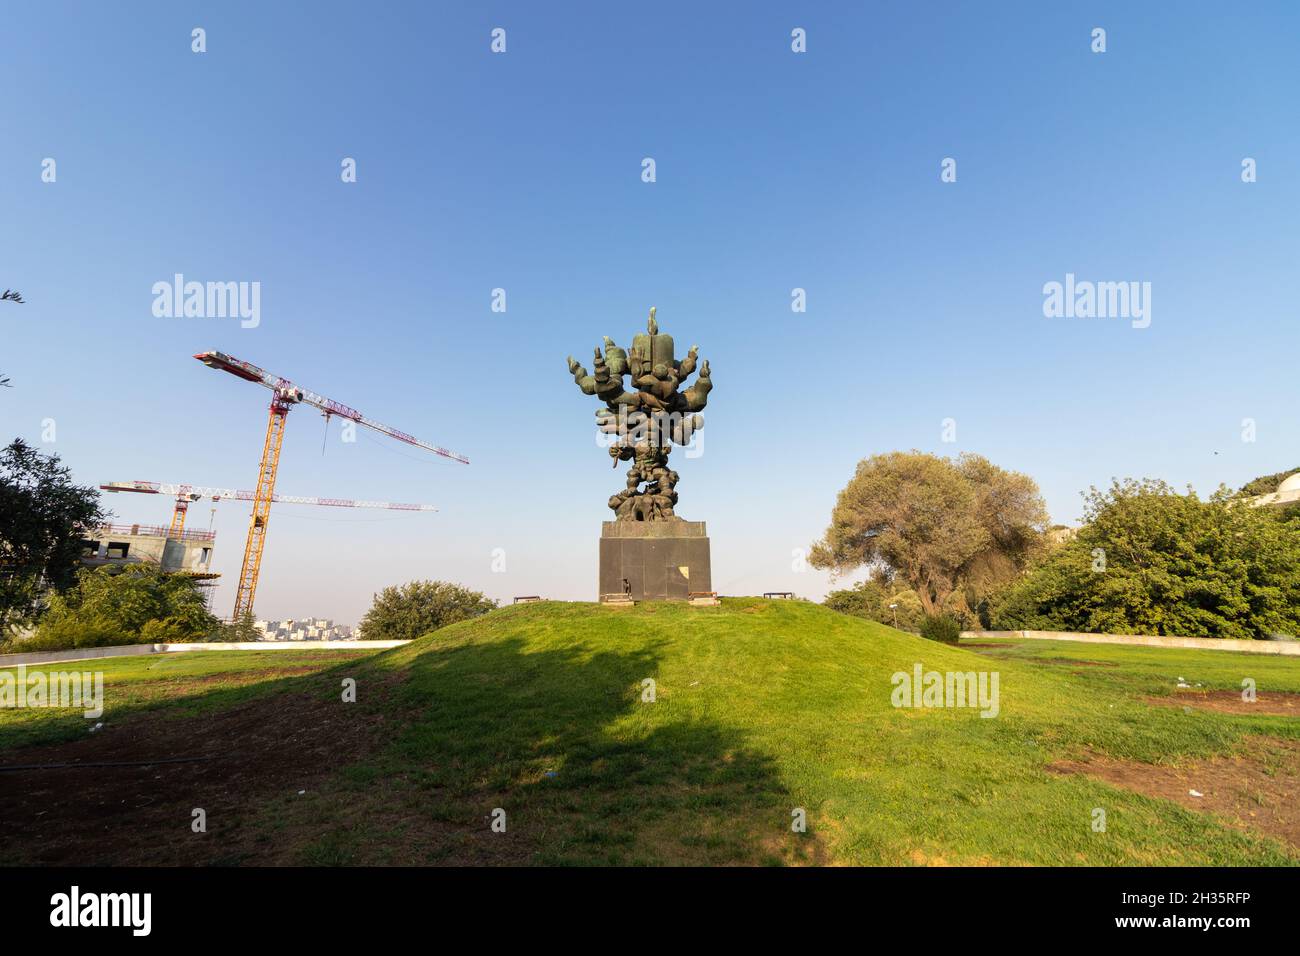 jerusalem-israel. 26-08-2021. The famous monument in the center of the grass at the entrance to Hadassah Hospital on Mount Scopus in Jerusalem Stock Photo